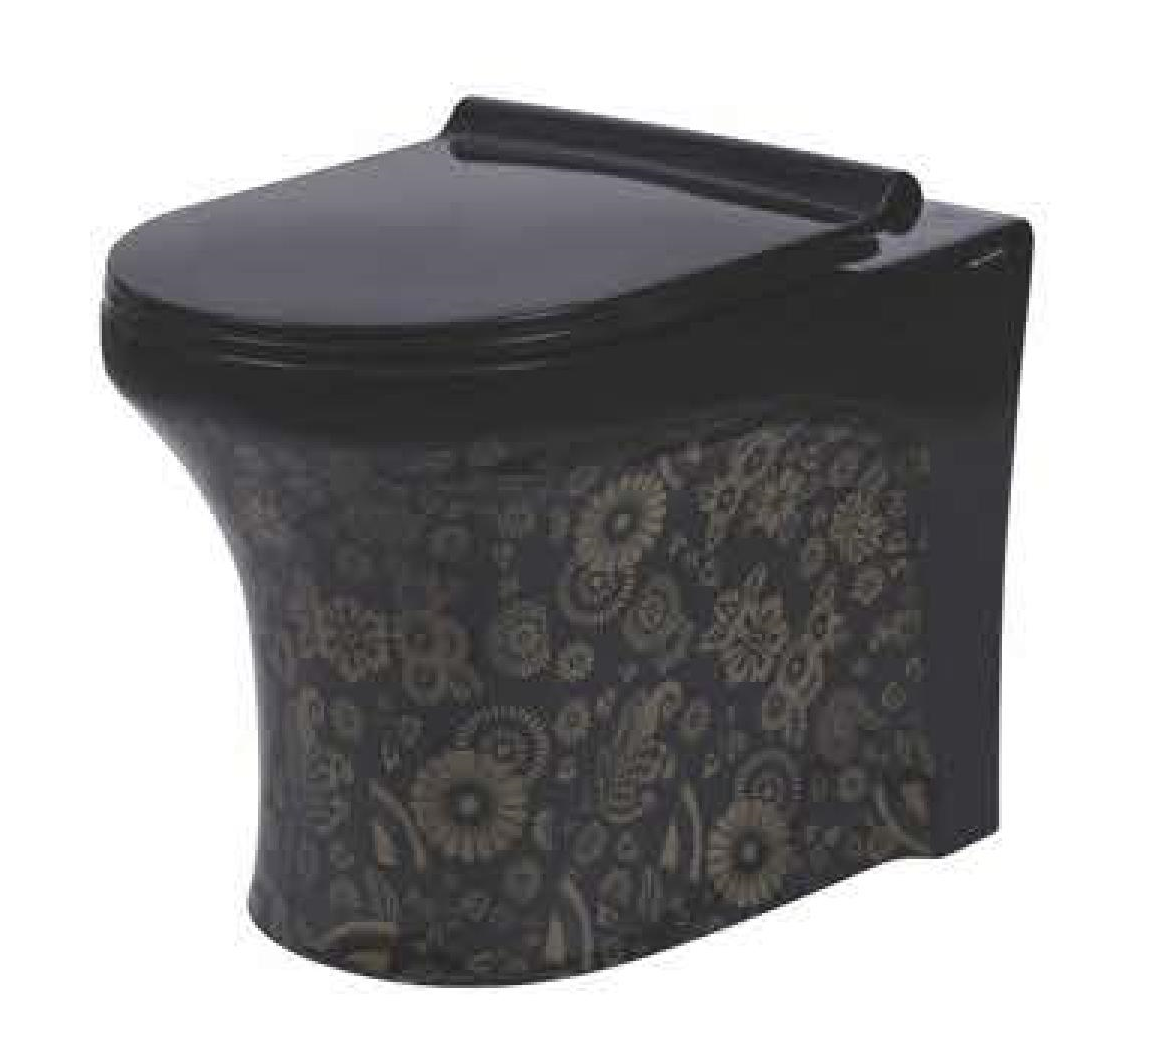 Ceramic Floor Mounted European Water Closet S Trap/One Piece Western Toilet Commode with Soft Close Seat OUTLET IS FROM FLOOR 53 x 36 x 40 cm (Black) - Bath Outlet